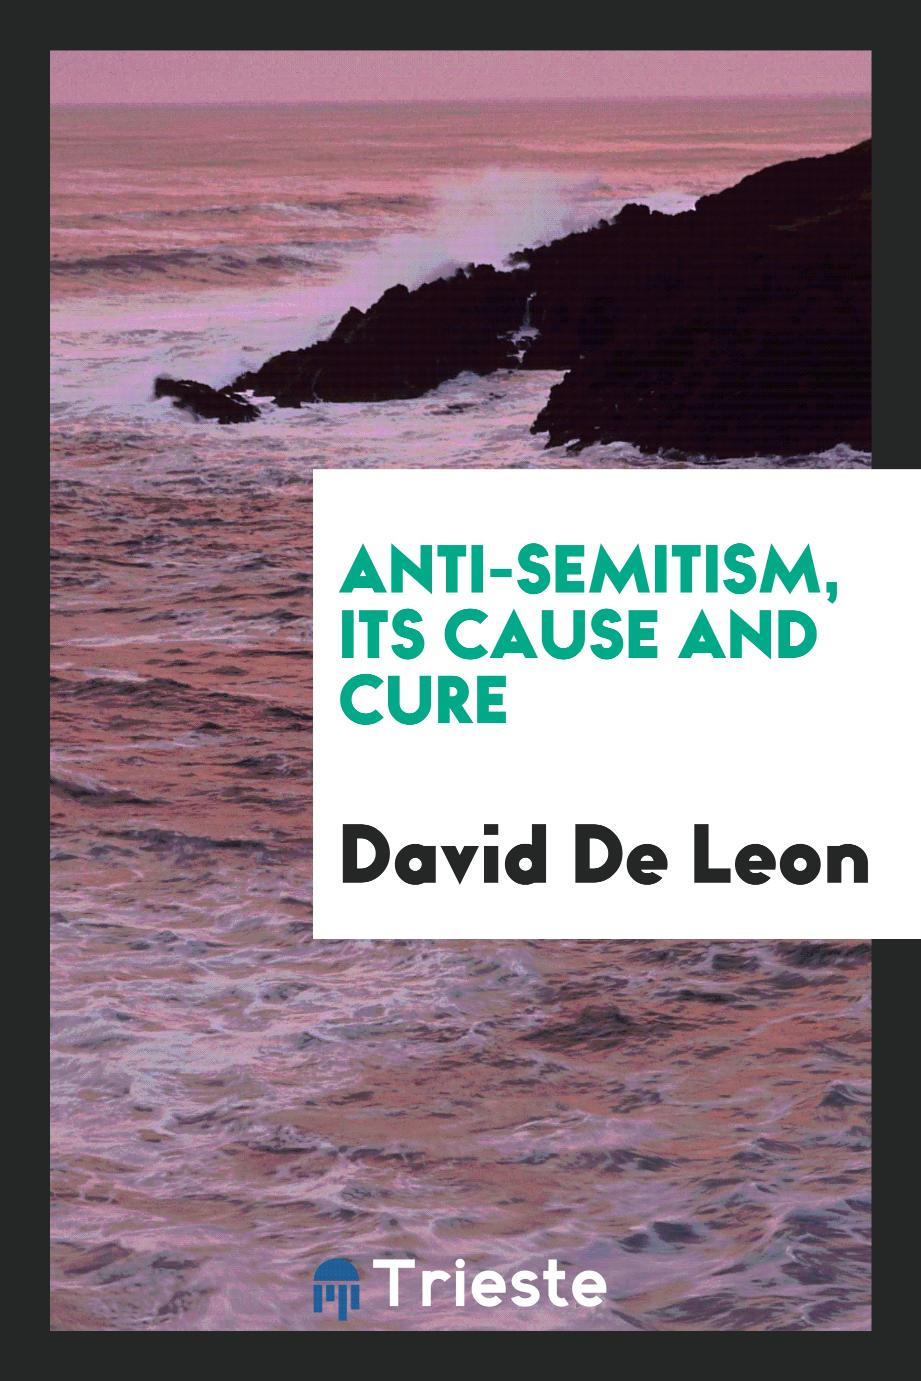 Anti-Semitism, its cause and cure